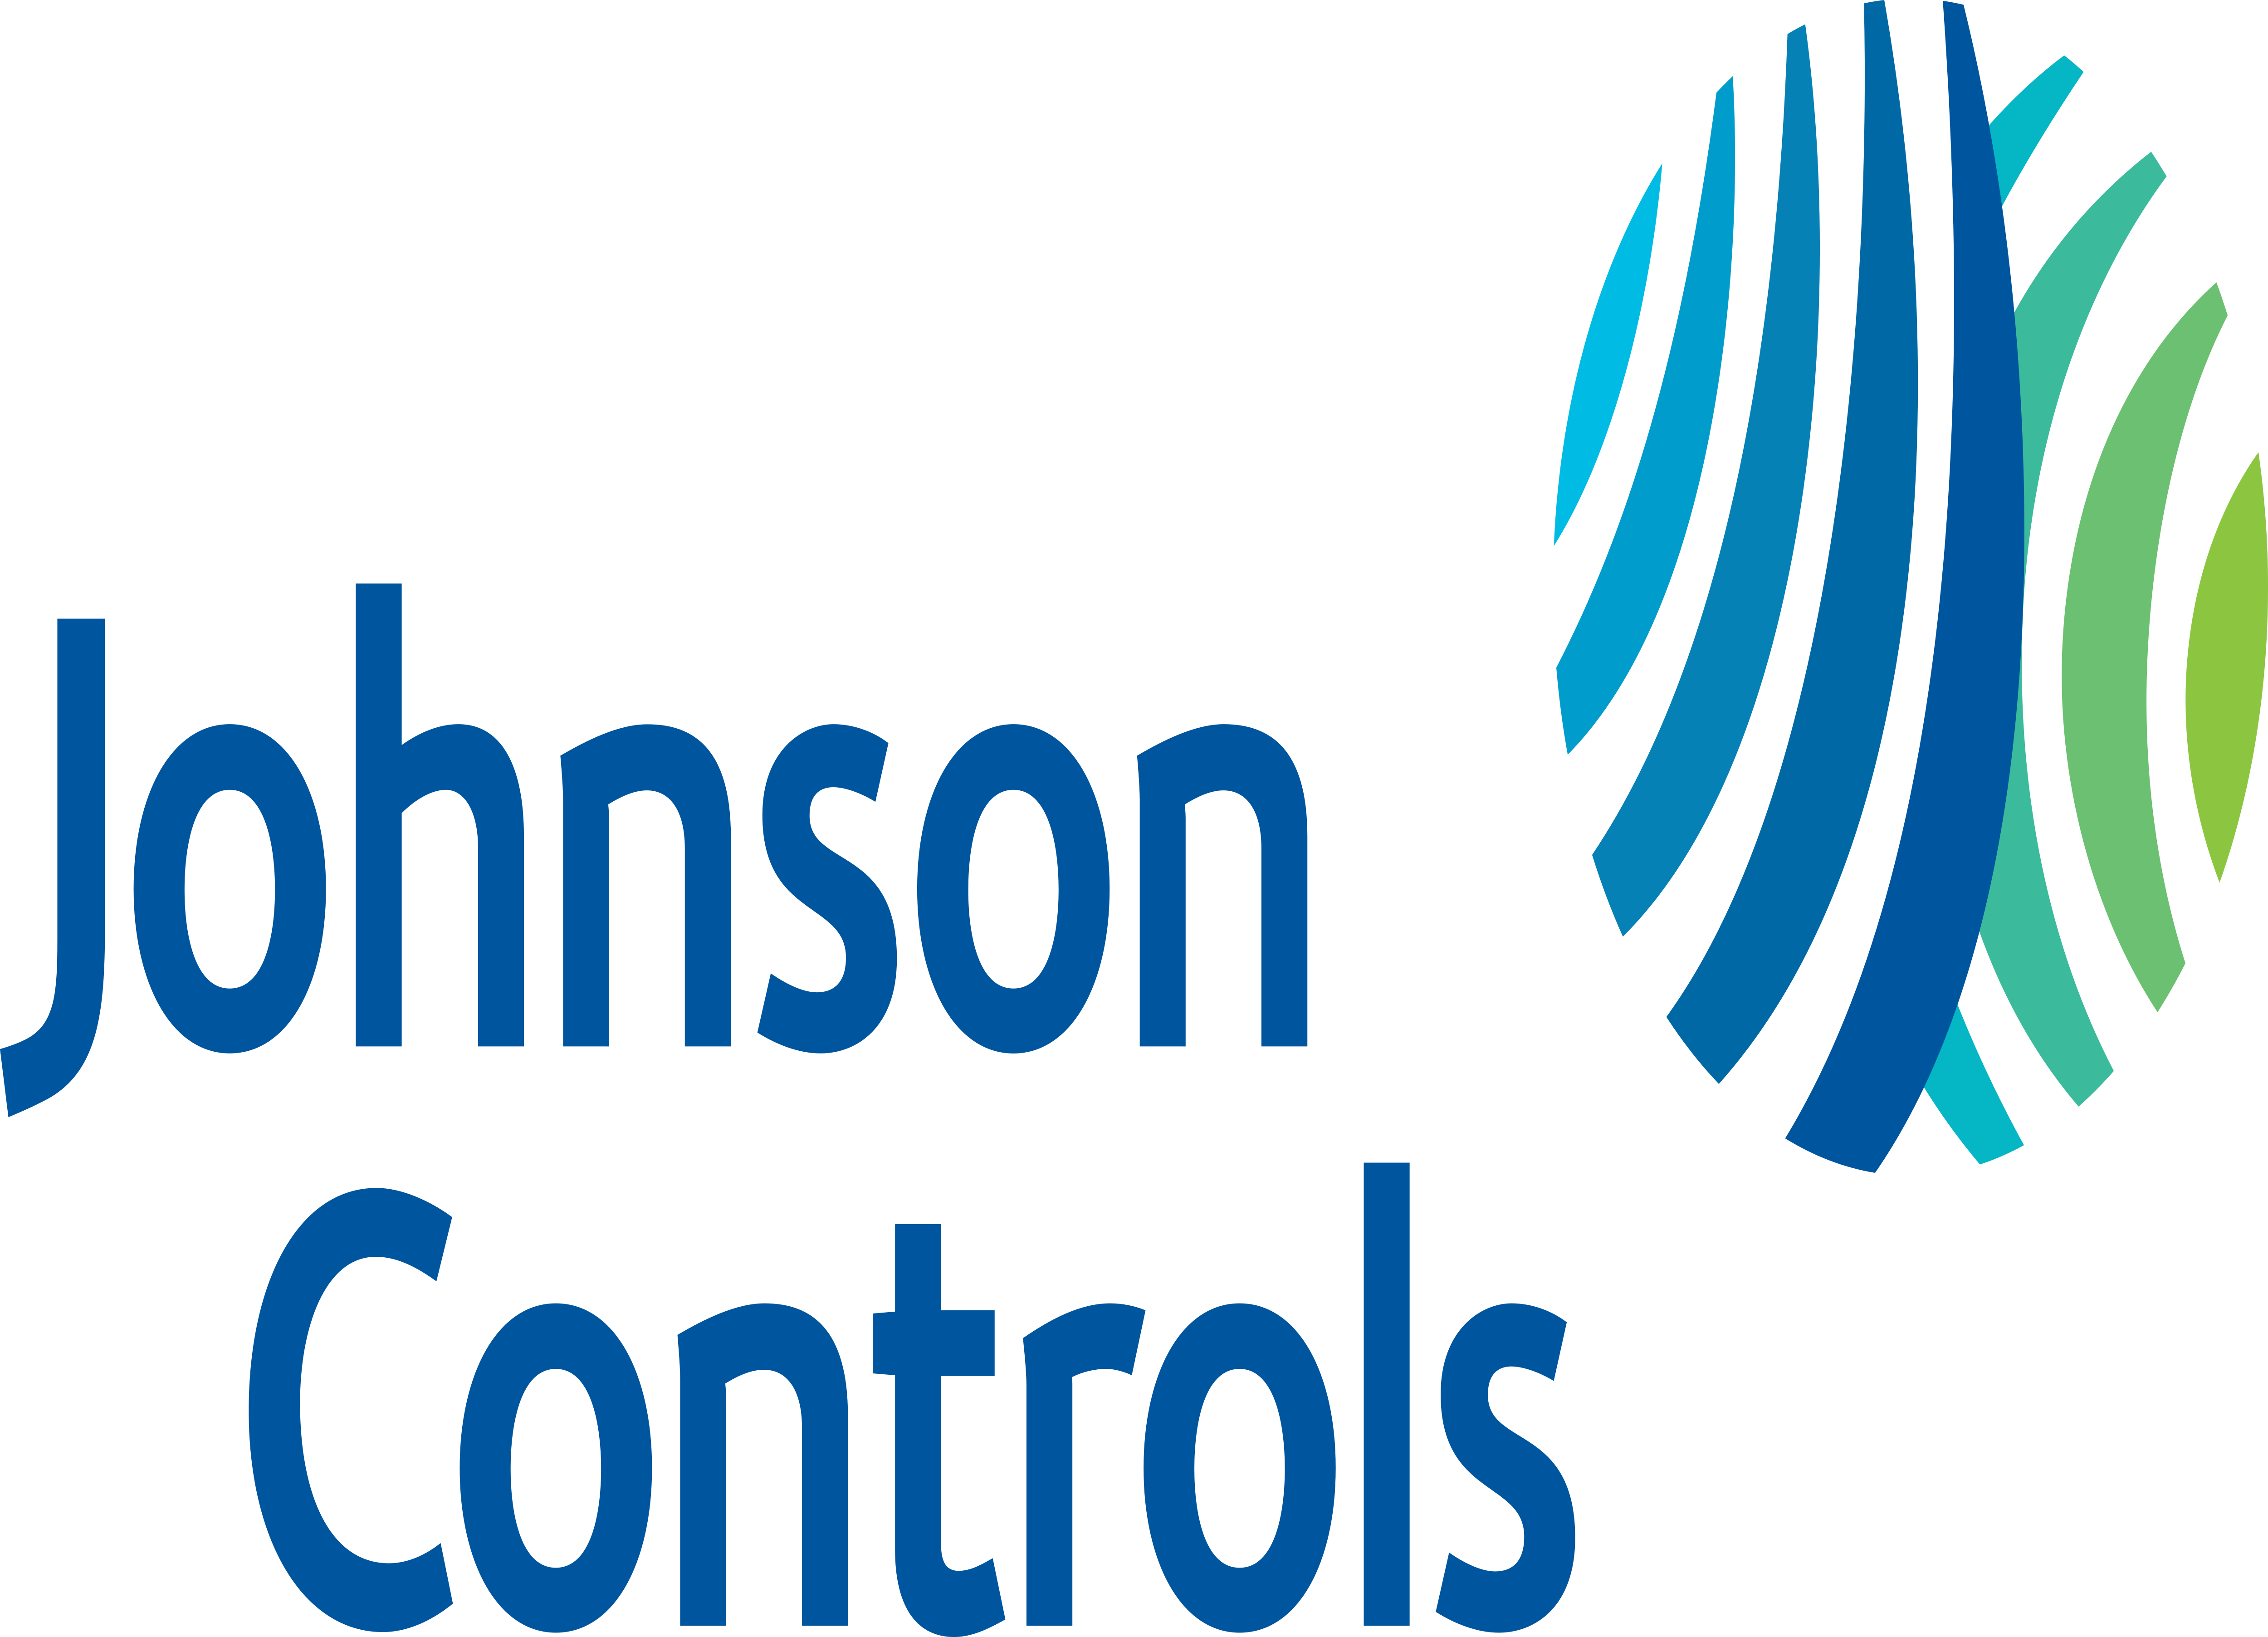 Johnson Controls completes merger with Tyco - Milwaukee Business Journal